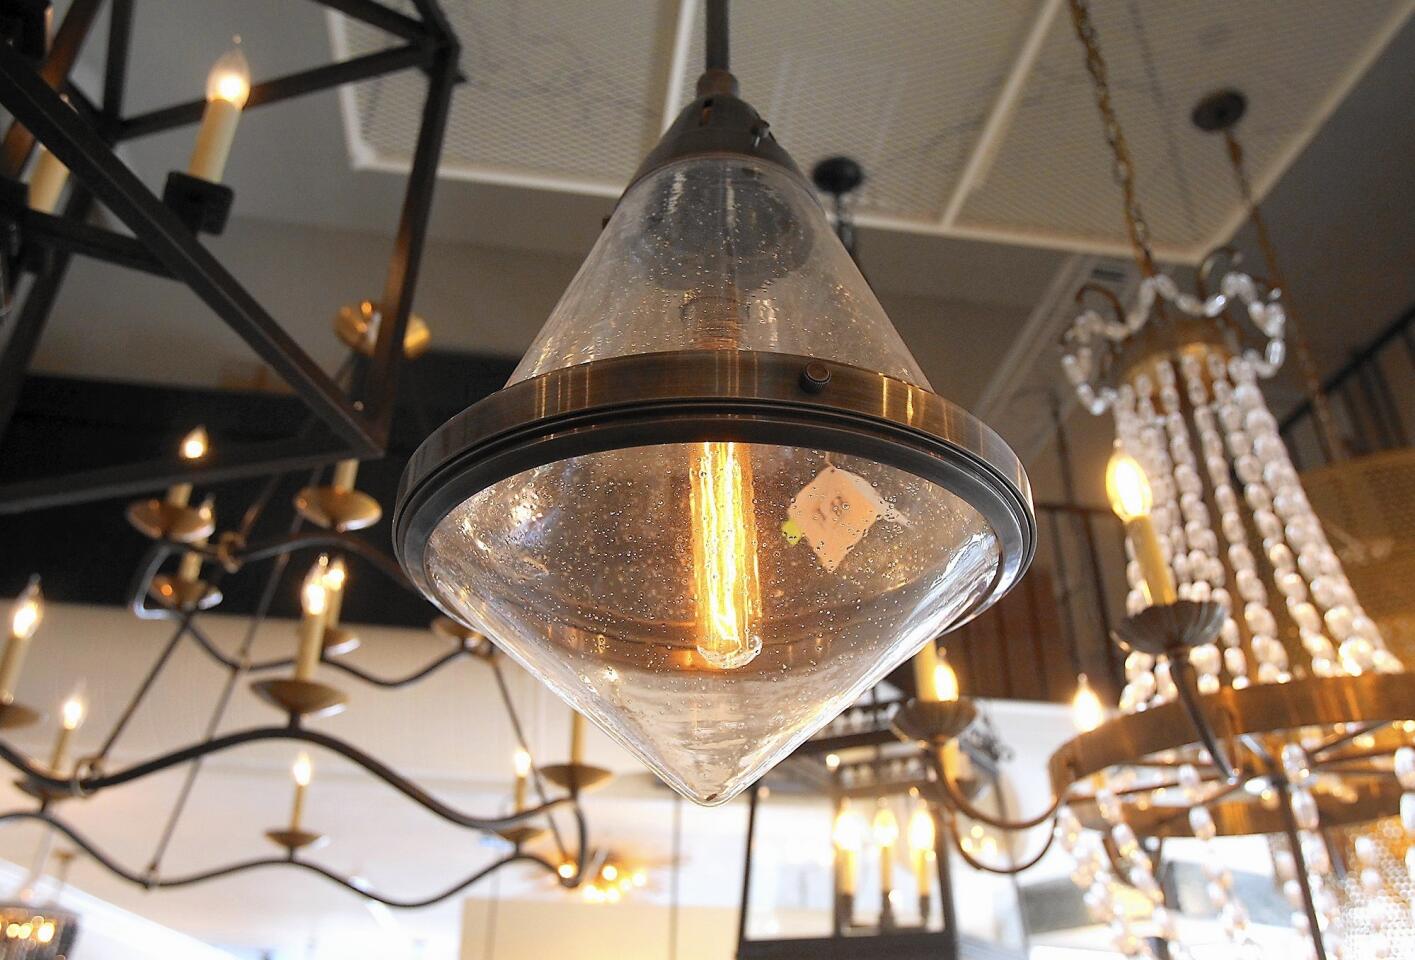 An example of the many light fixtures and designs at the Linden Rose Lighting in Corona del Mar.